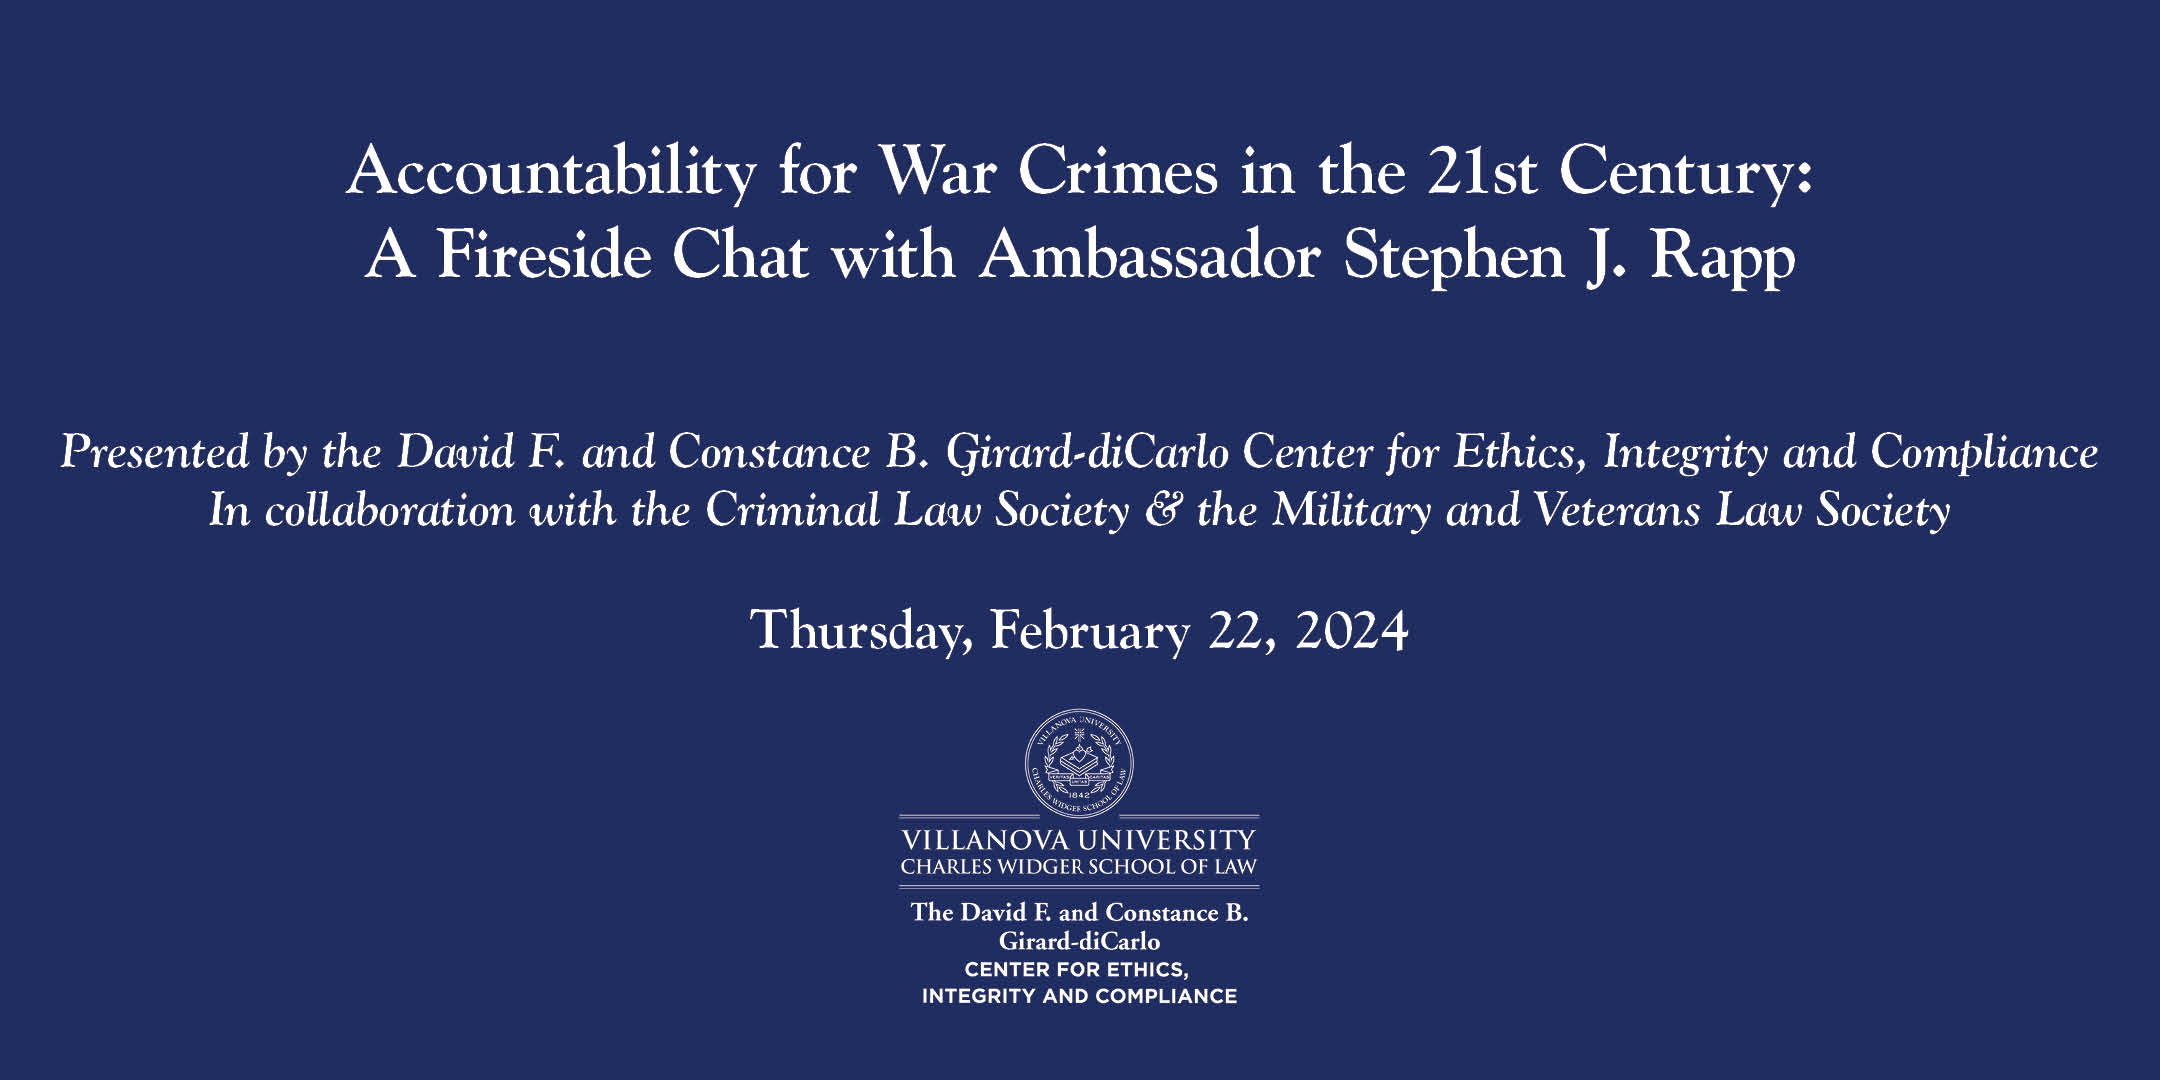 Accountability for War Crimes in the 21st Century; A Fireside Chat with Ambassador Stephen J. Rapp